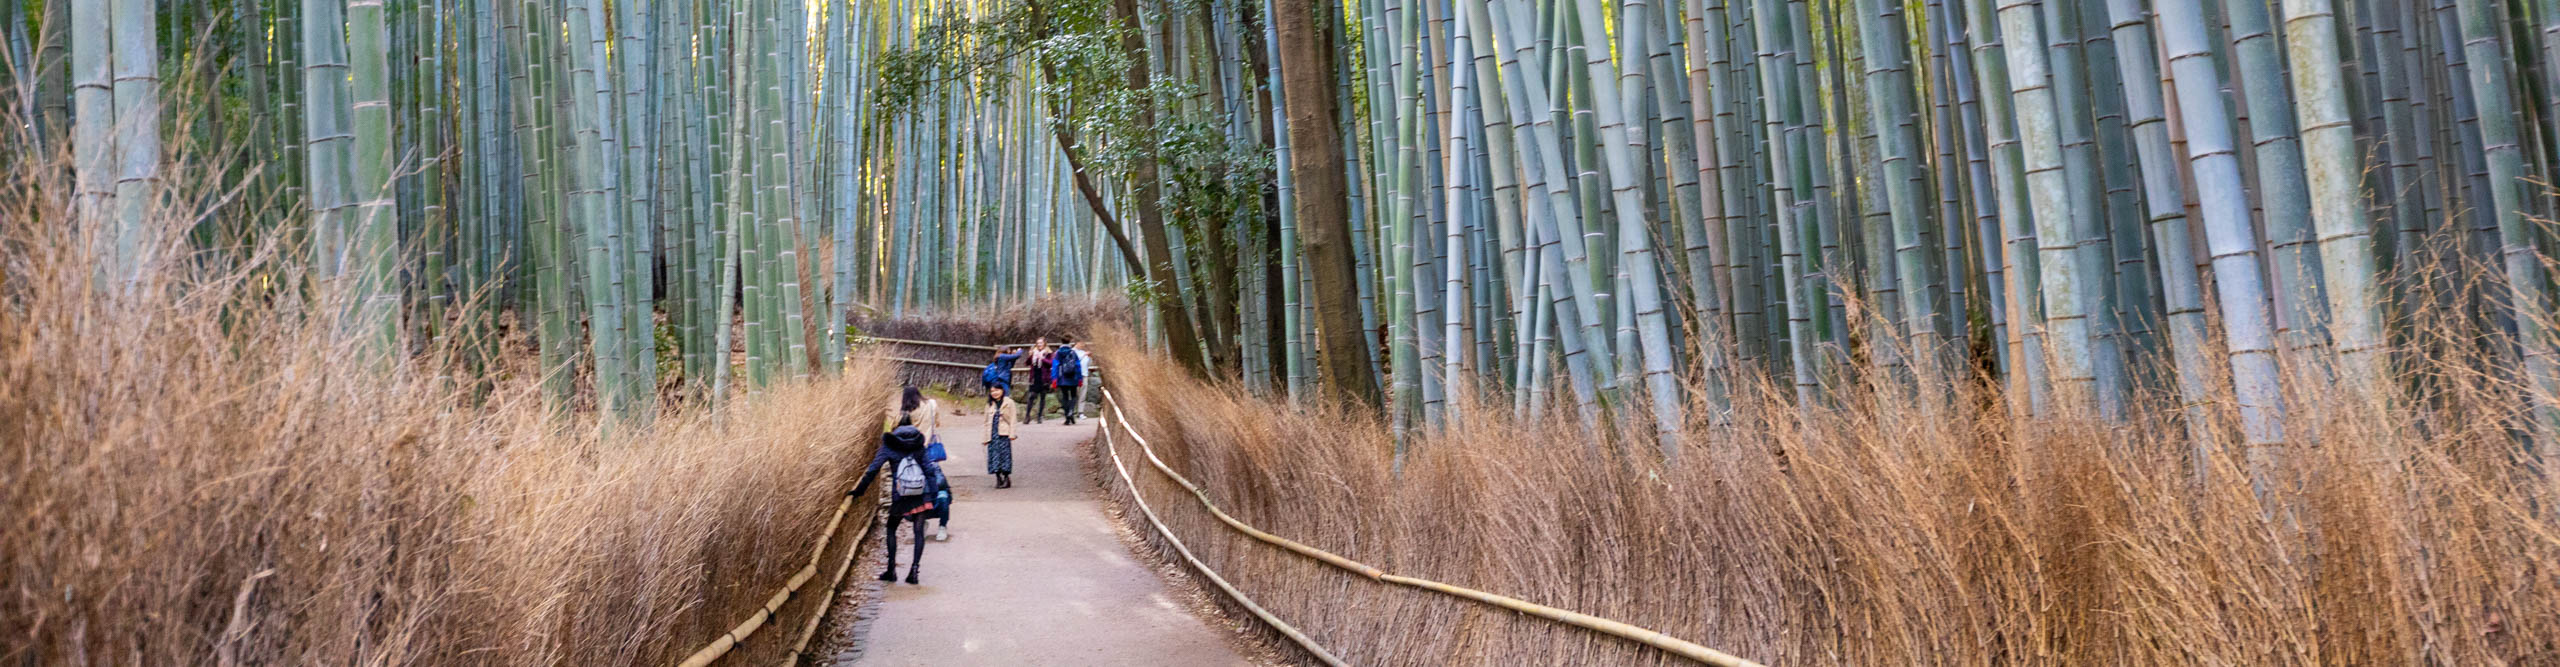 Group walking through the bamboo forest, Kyoto, Japan